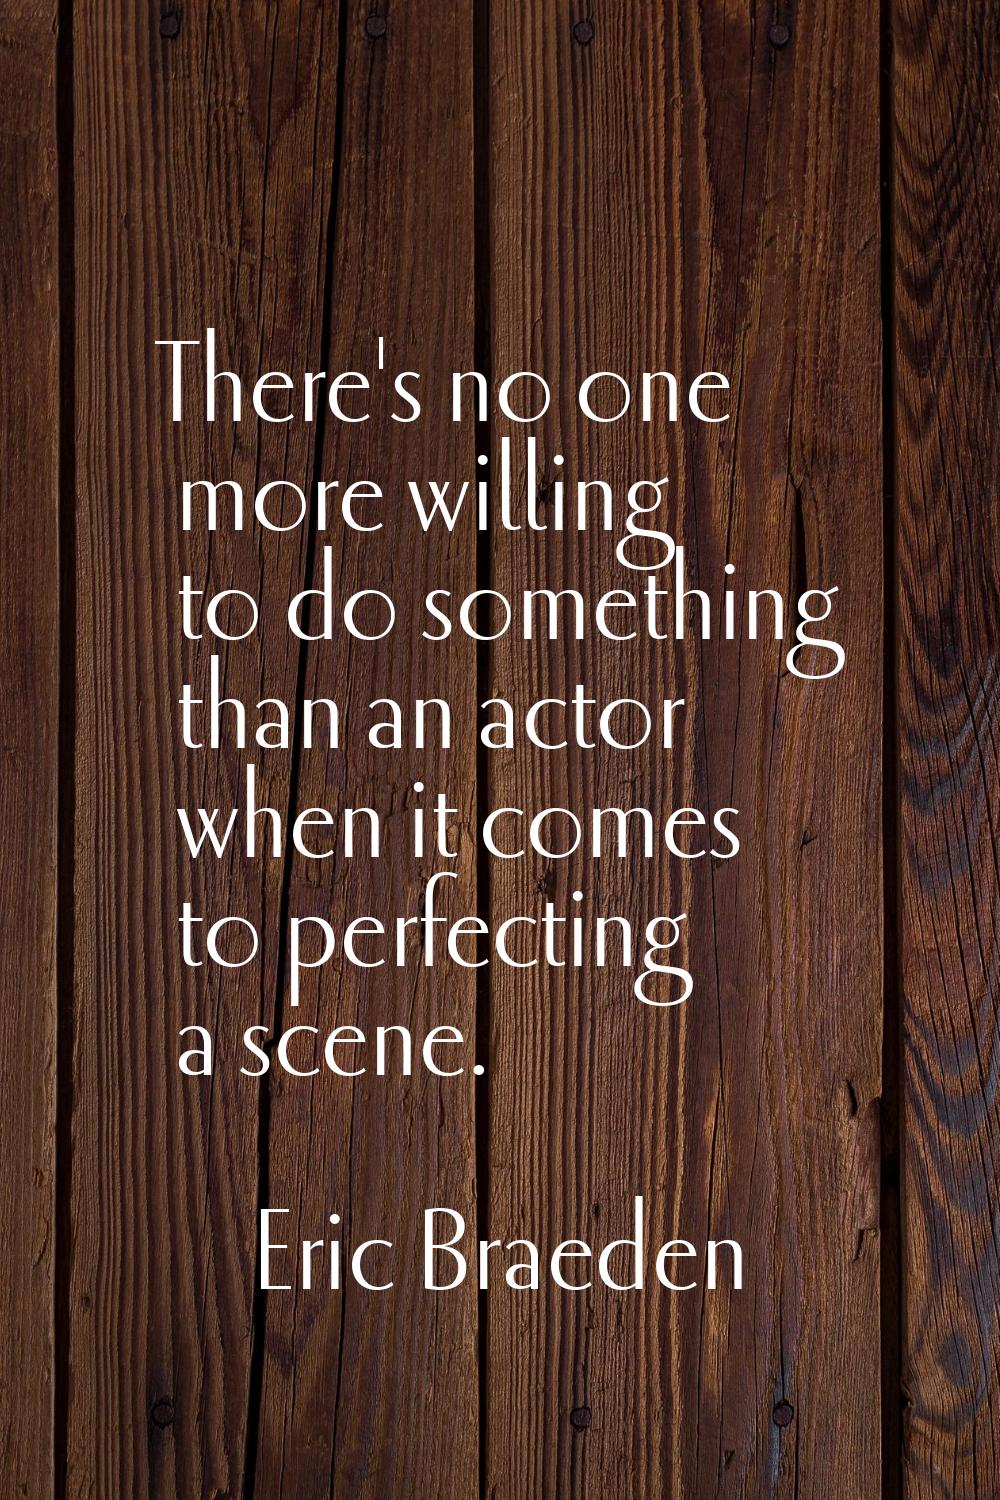 There's no one more willing to do something than an actor when it comes to perfecting a scene.